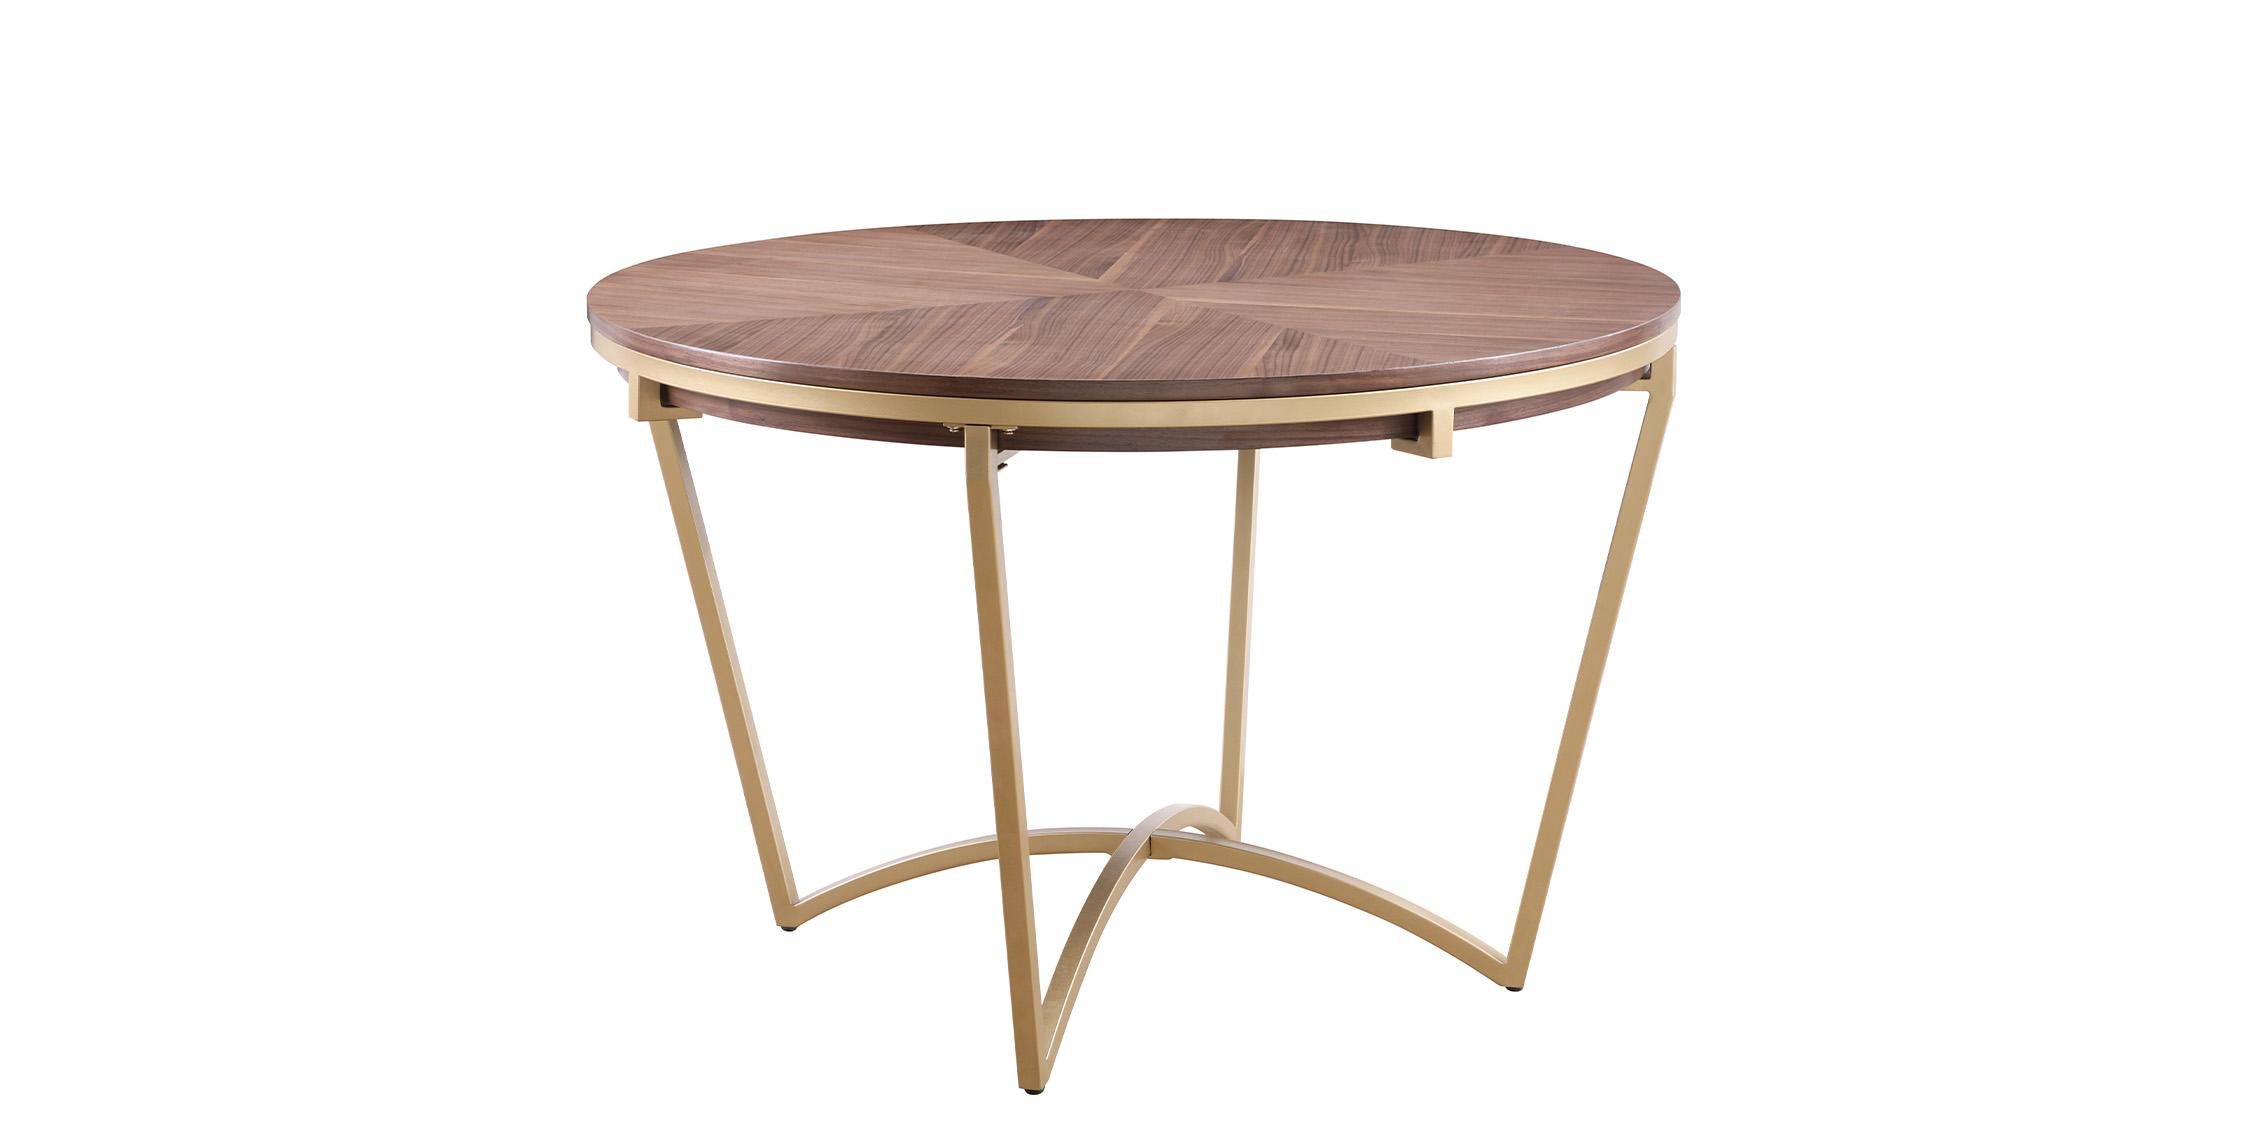 Contemporary, Modern Dining Table ELEANOR 932-T 932-T in Walnut, Gold 